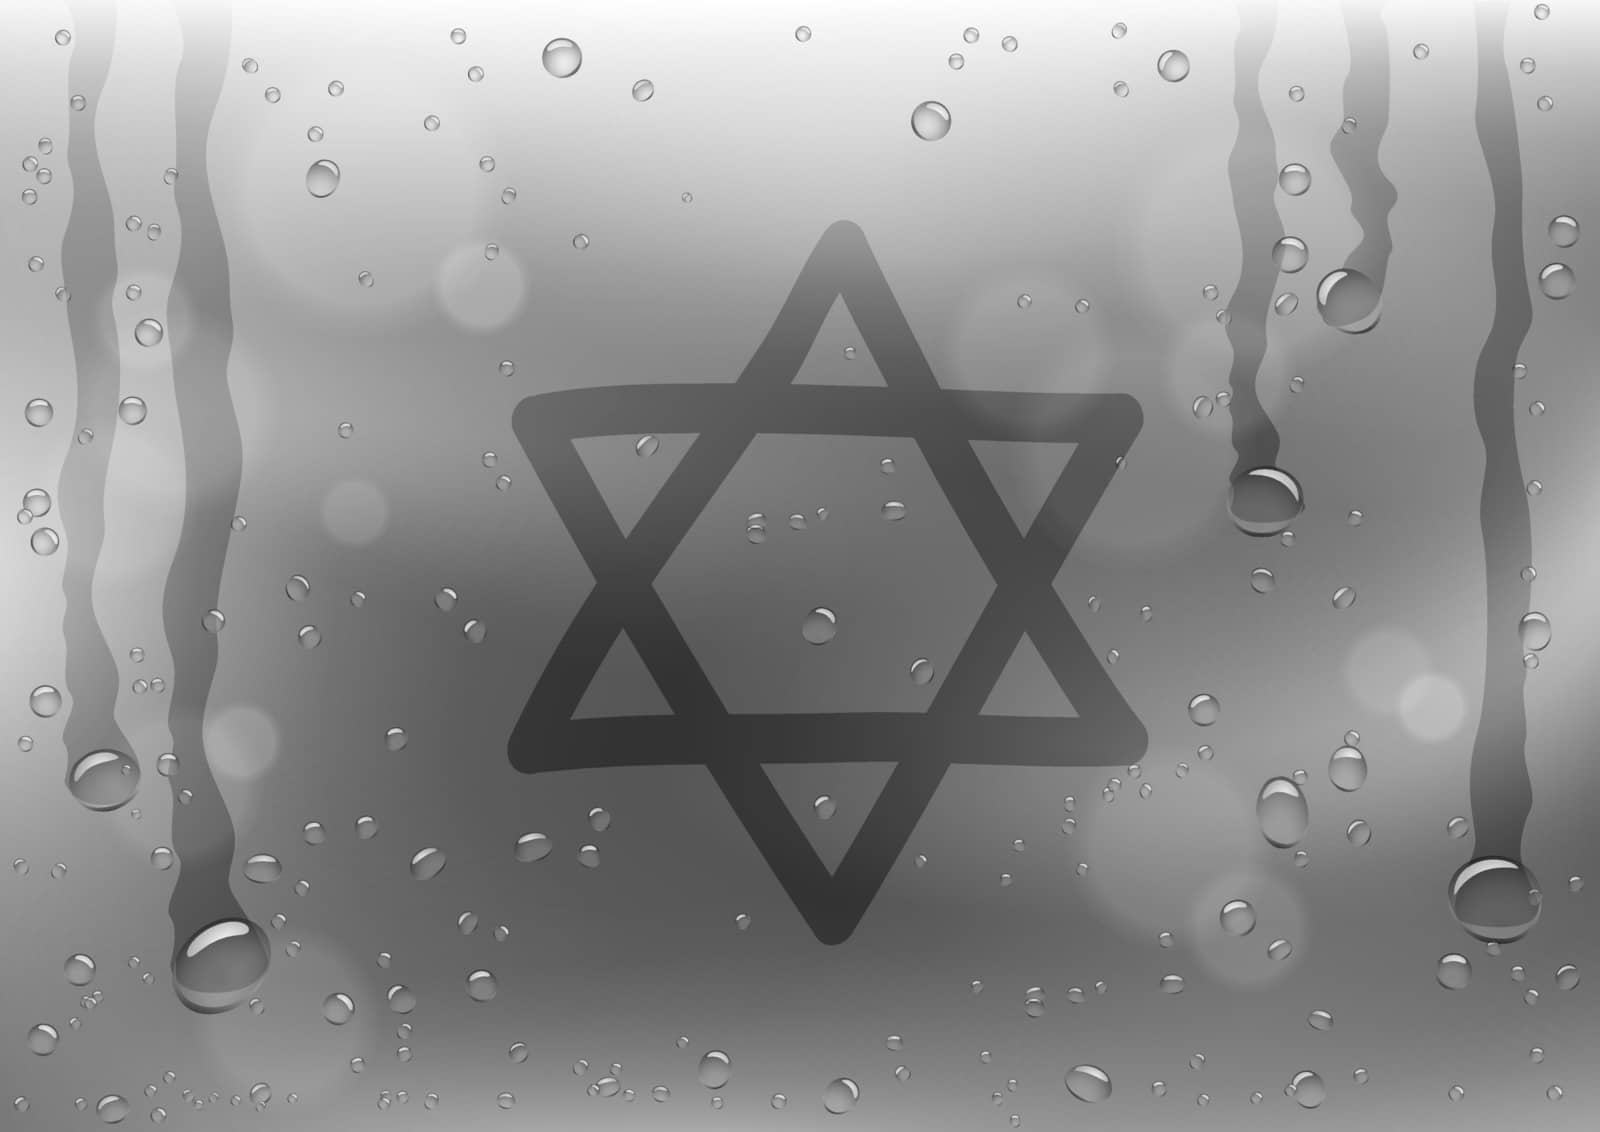 Finger draw star of David sign on rain gray background. Water hand writing religious symbol on glass surface